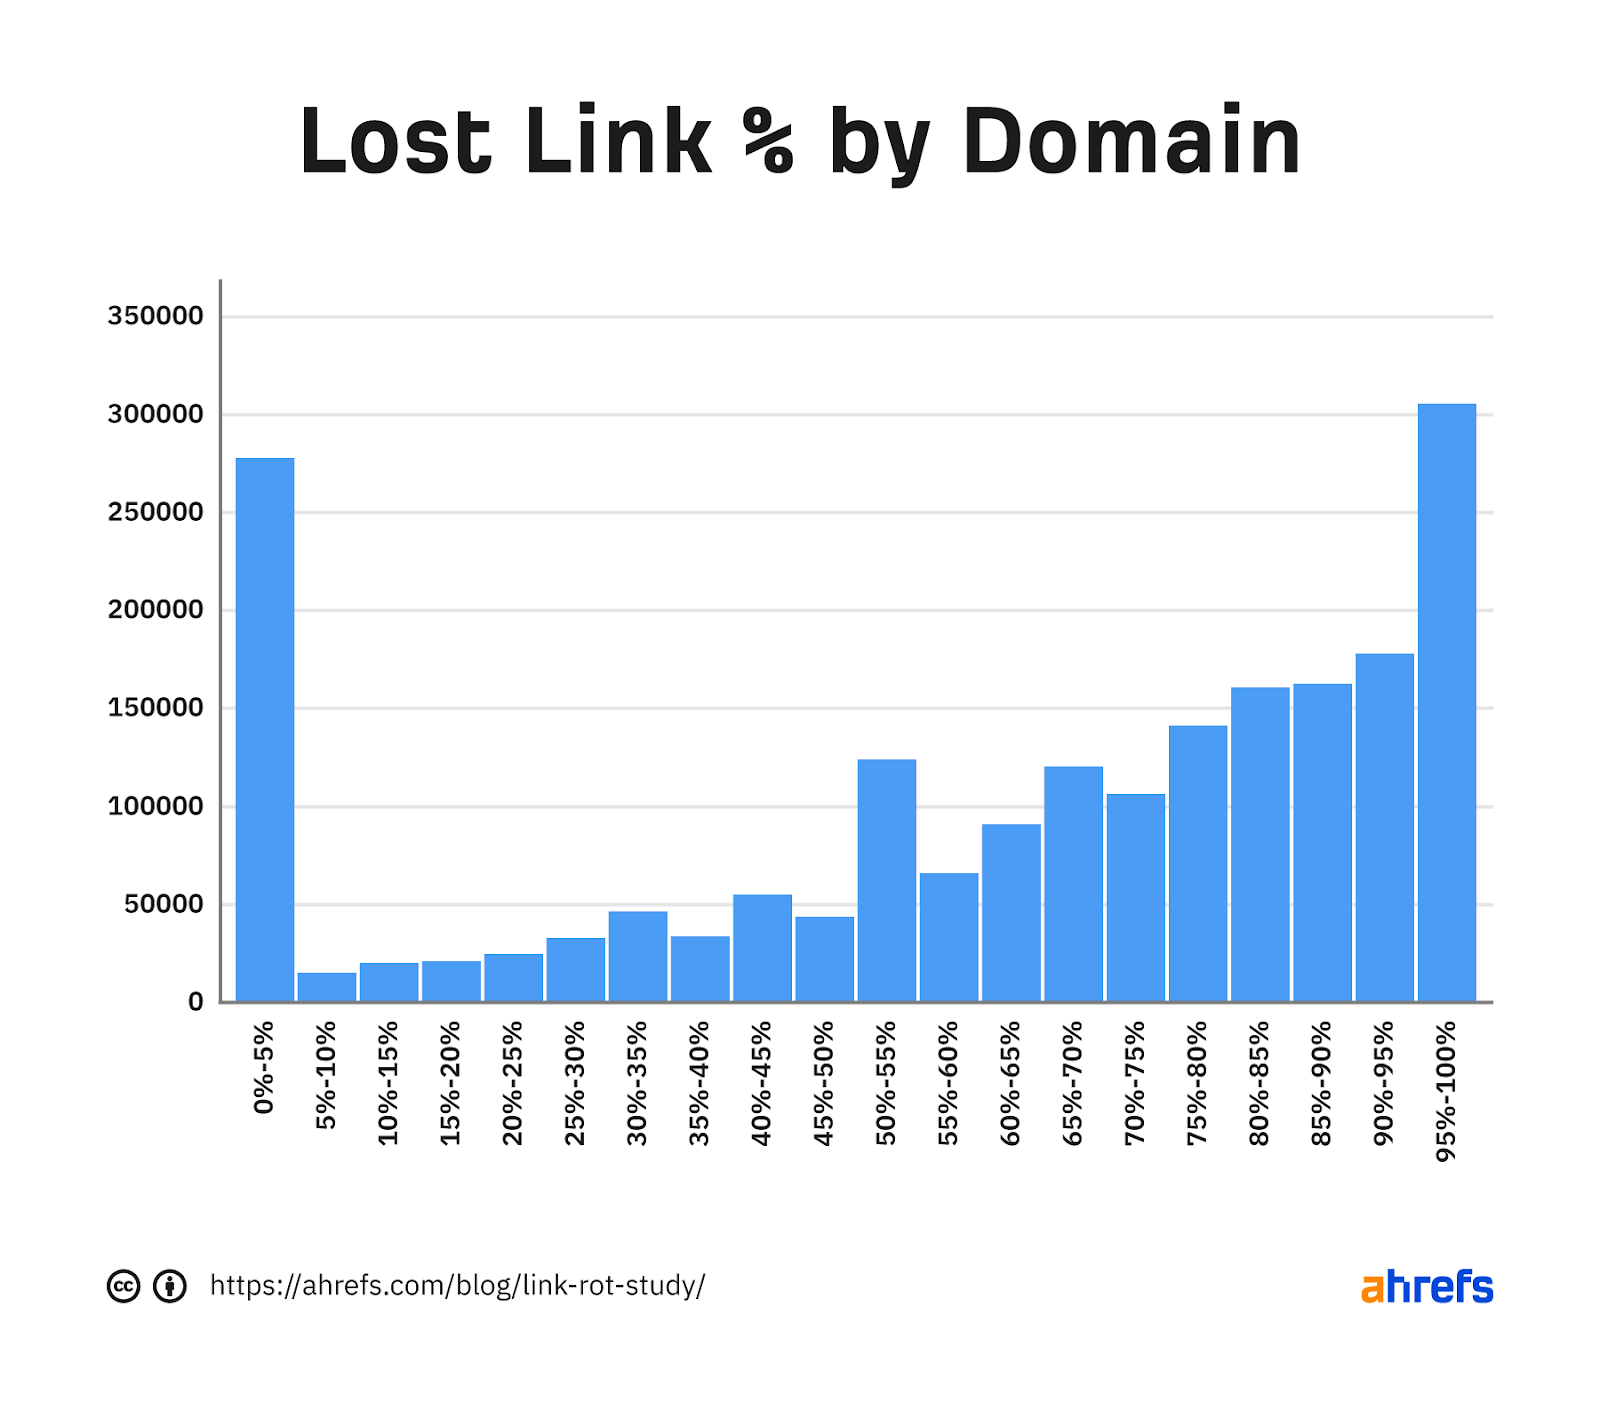 Histogram showing lost link percentage by domain